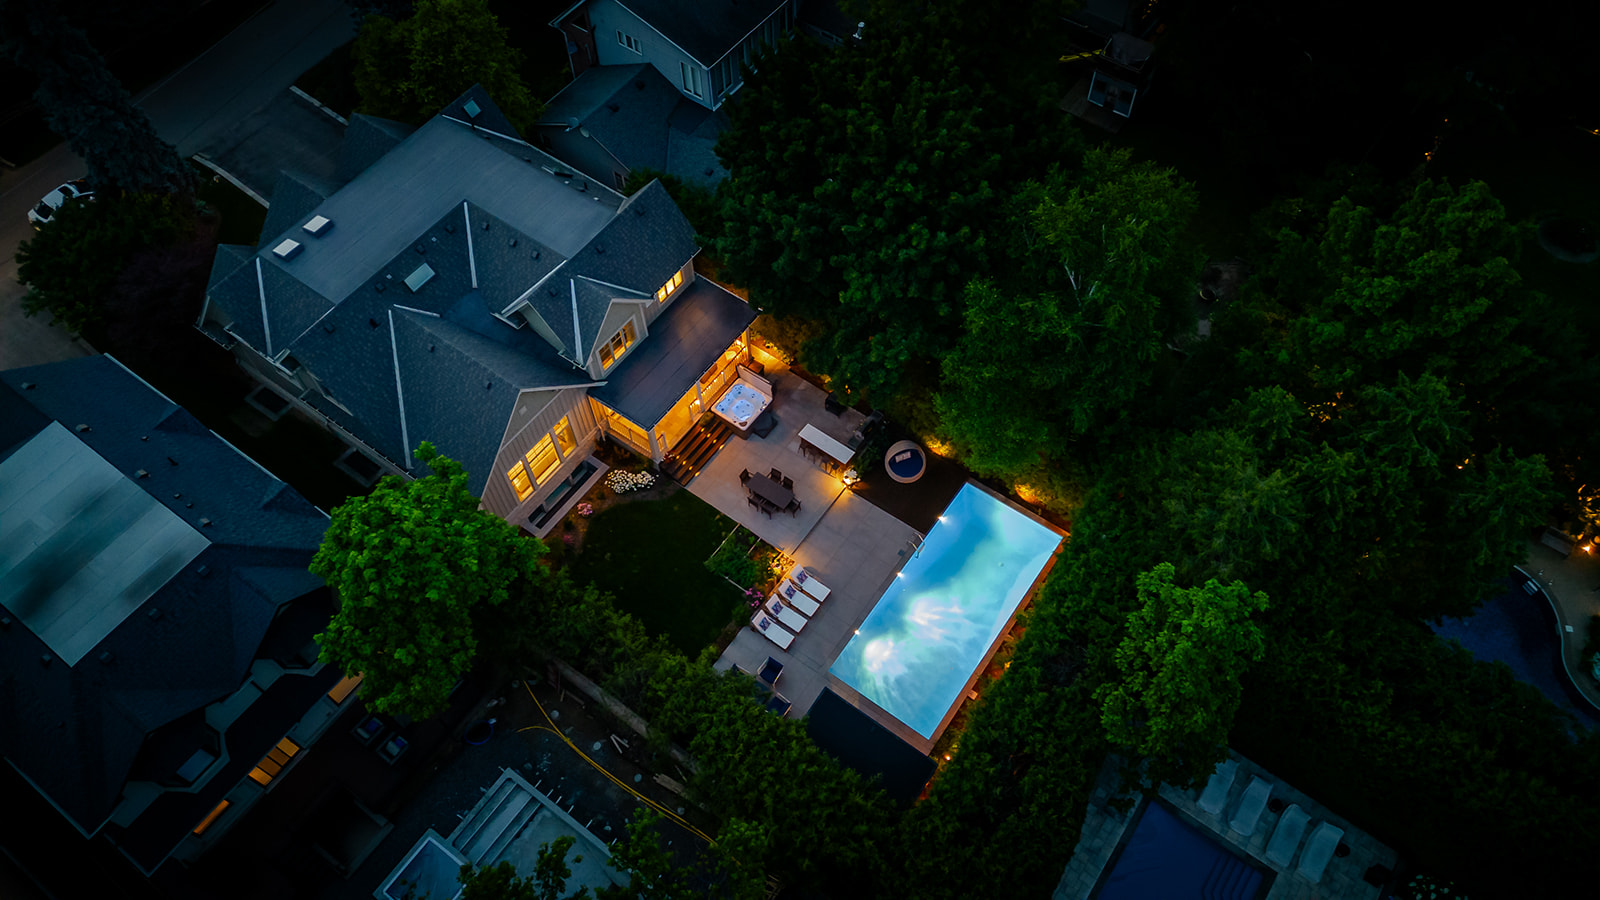 A drone shot of the backyard with the lights on in the pool and inside the house.